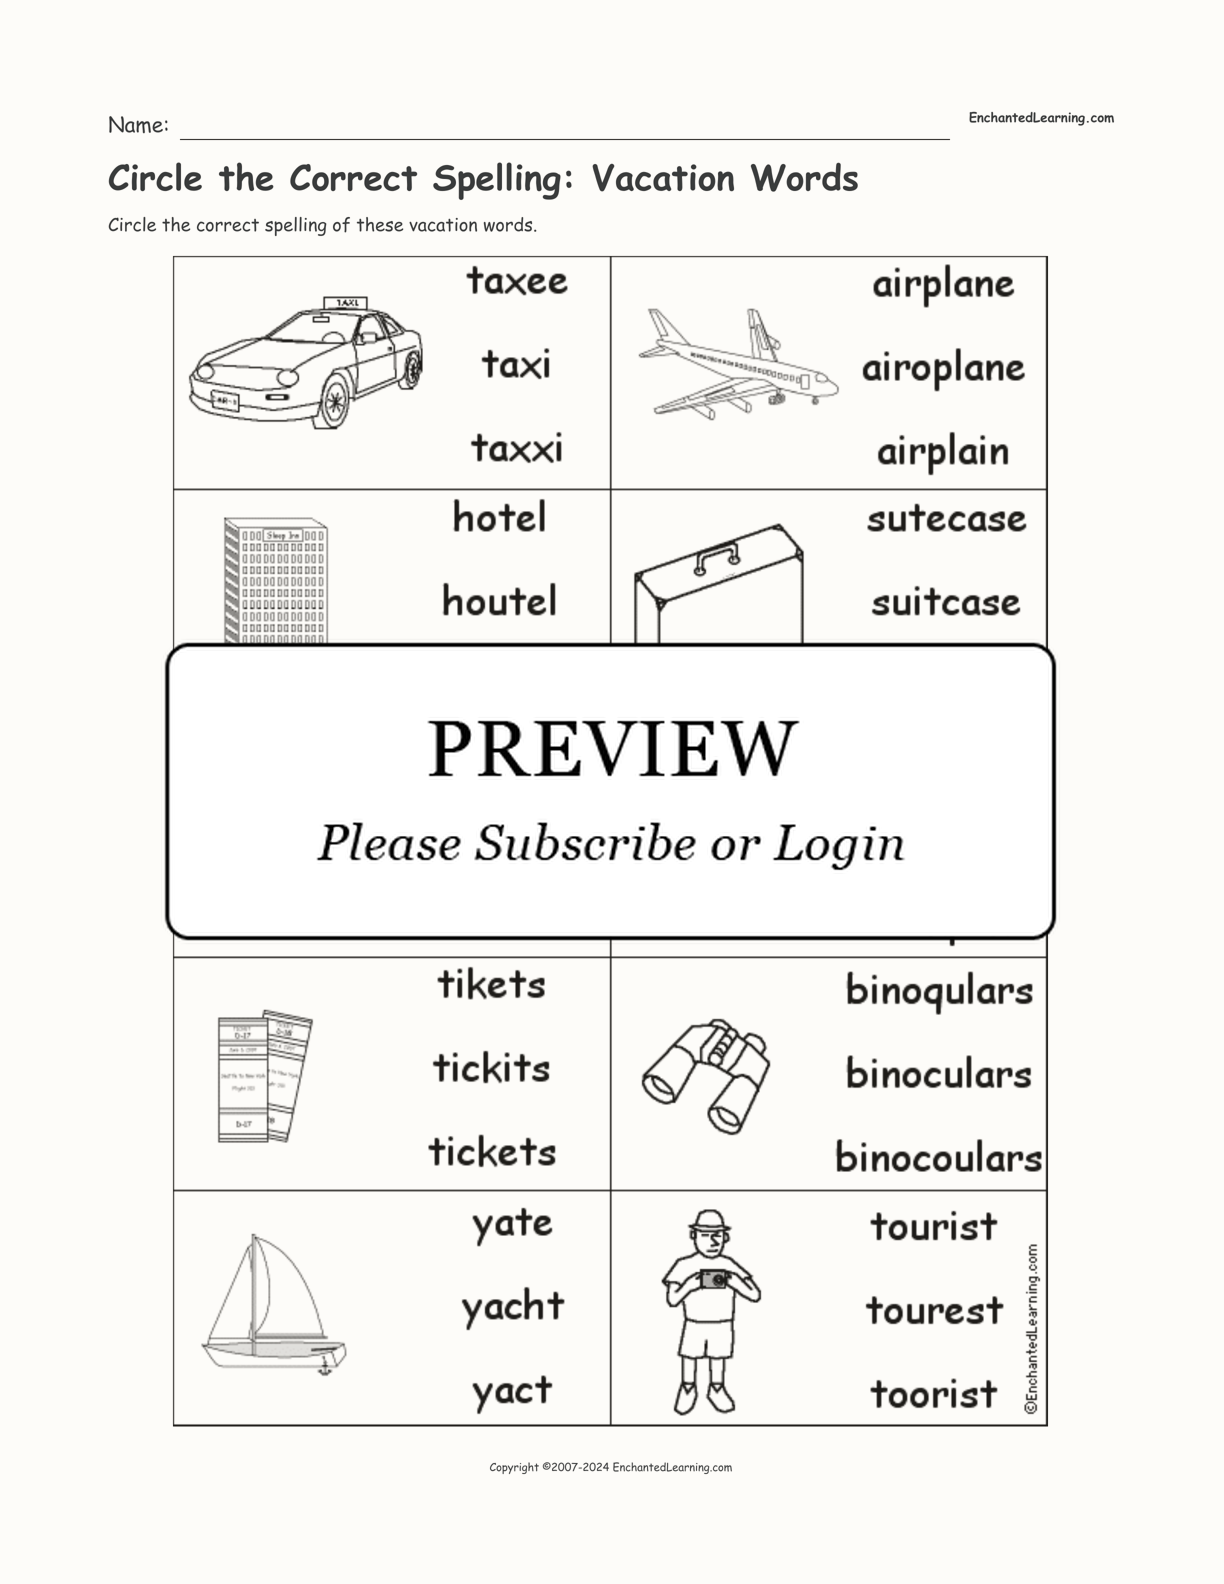 Circle the Correct Spelling: Vacation Words interactive worksheet page 1